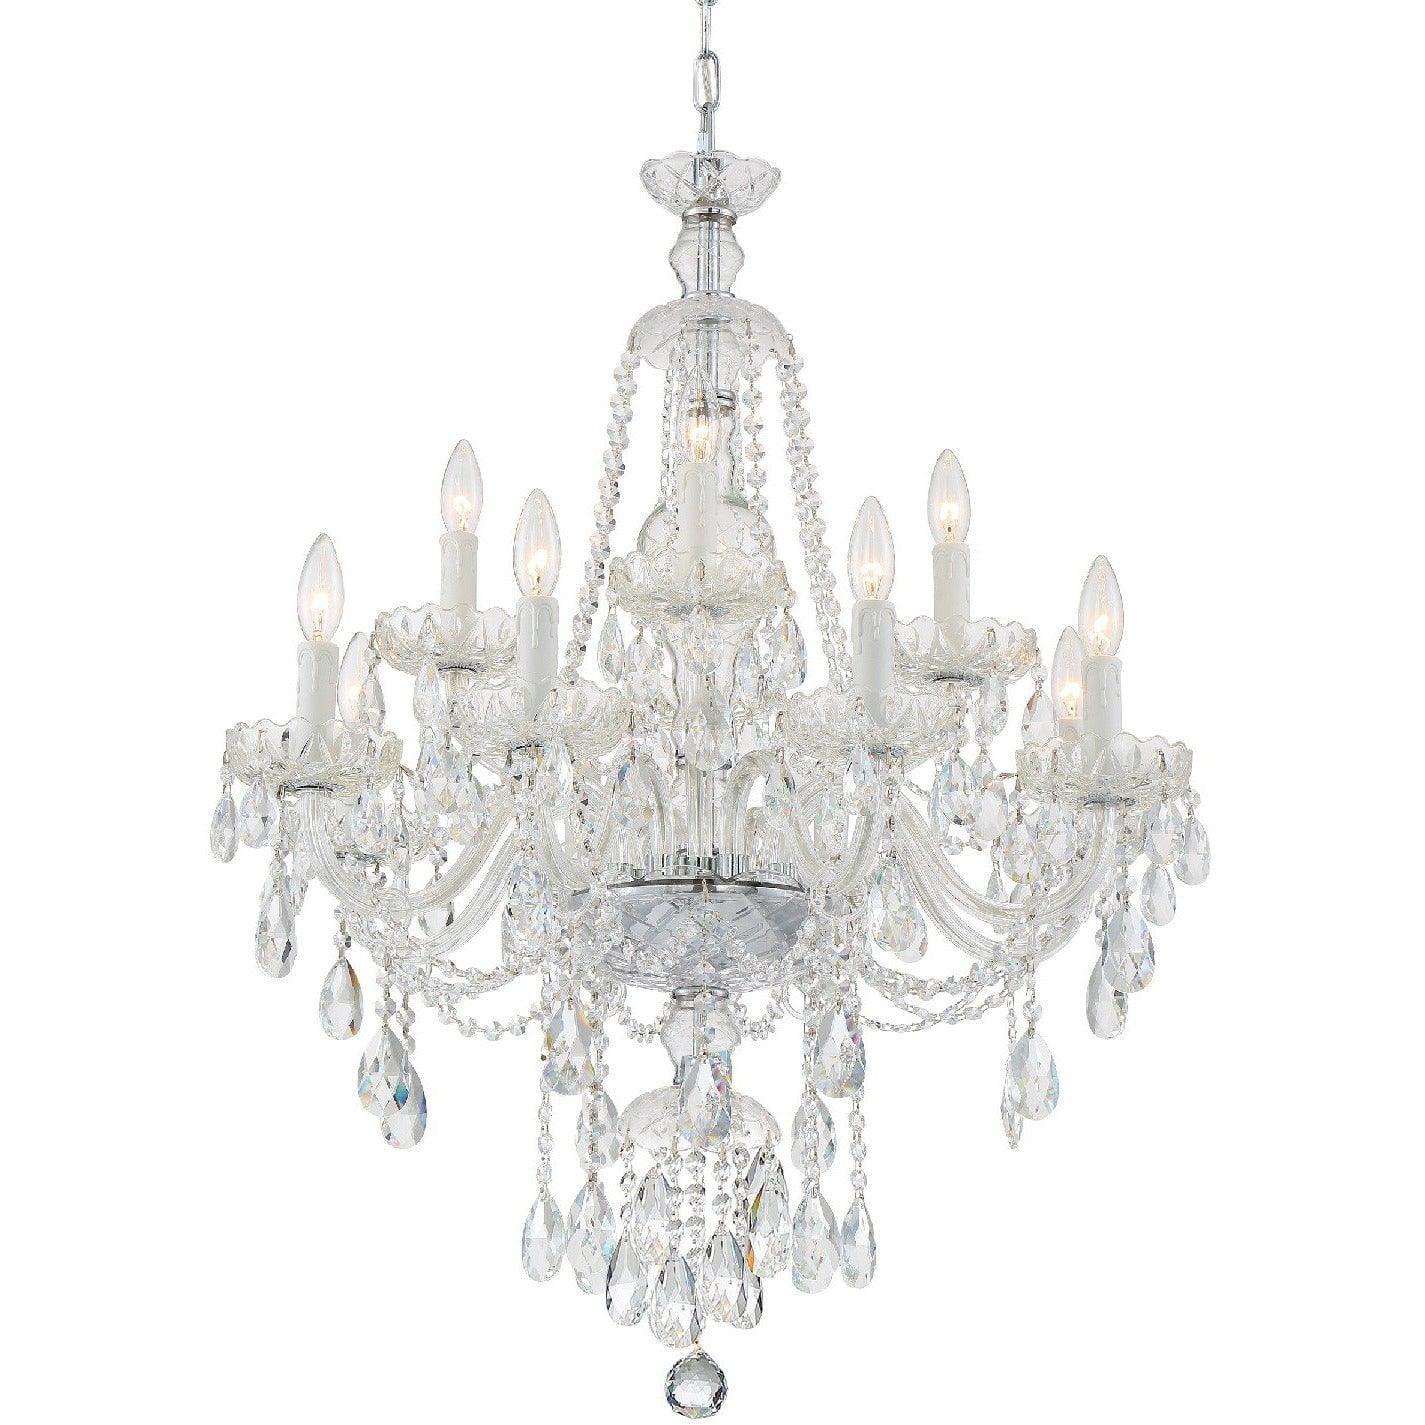 Crystorama - Candace 12 Light Chandelier - CAN-A1312-CH-CL-MWP | Montreal Lighting & Hardware